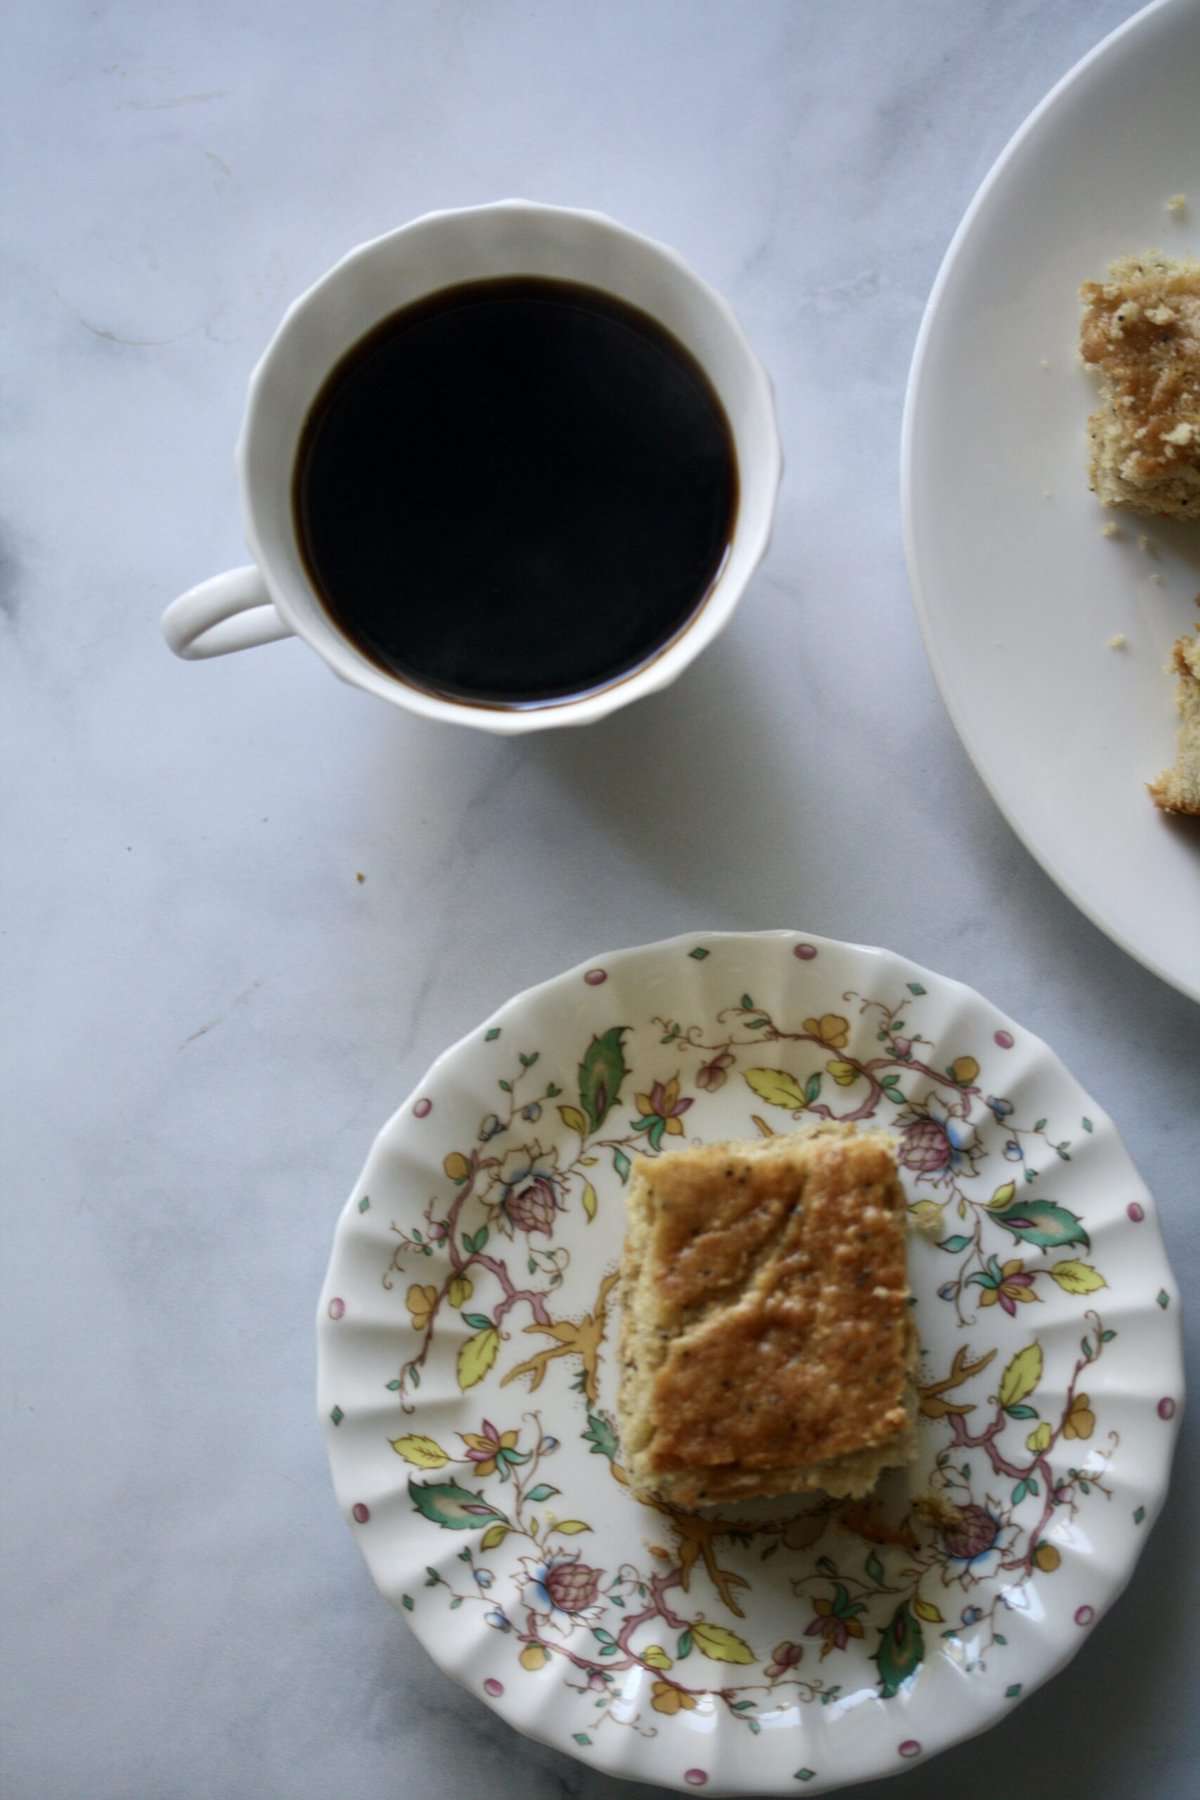 Gluten-free Meyer lemon snack cake and a cup of coffee.